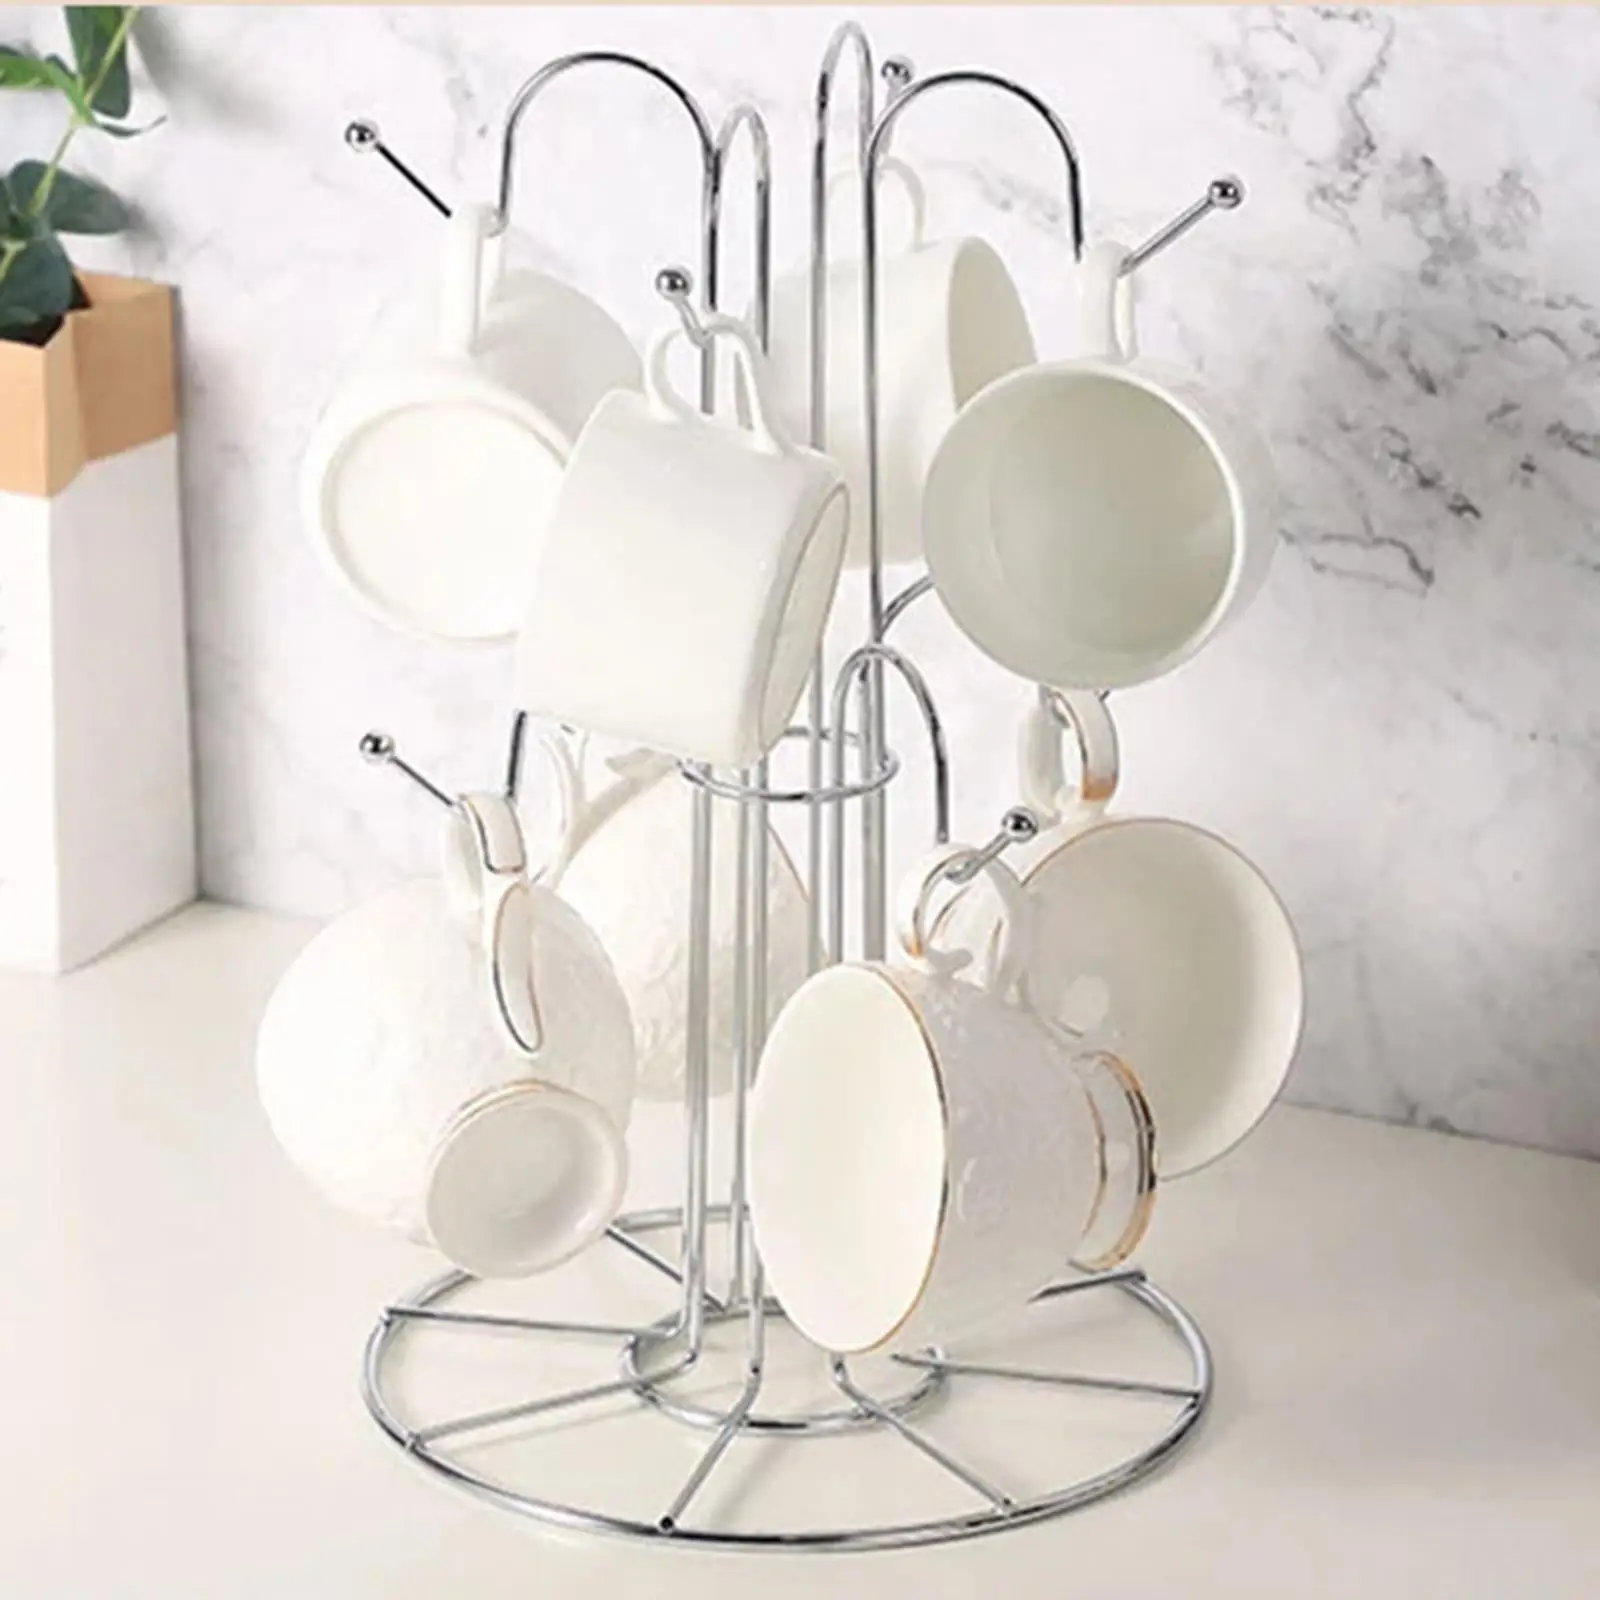 Cup Drying Rack Drainer 8 Hooks Tree Coffee Bar Decor Diversified Stand for Tabletop Home